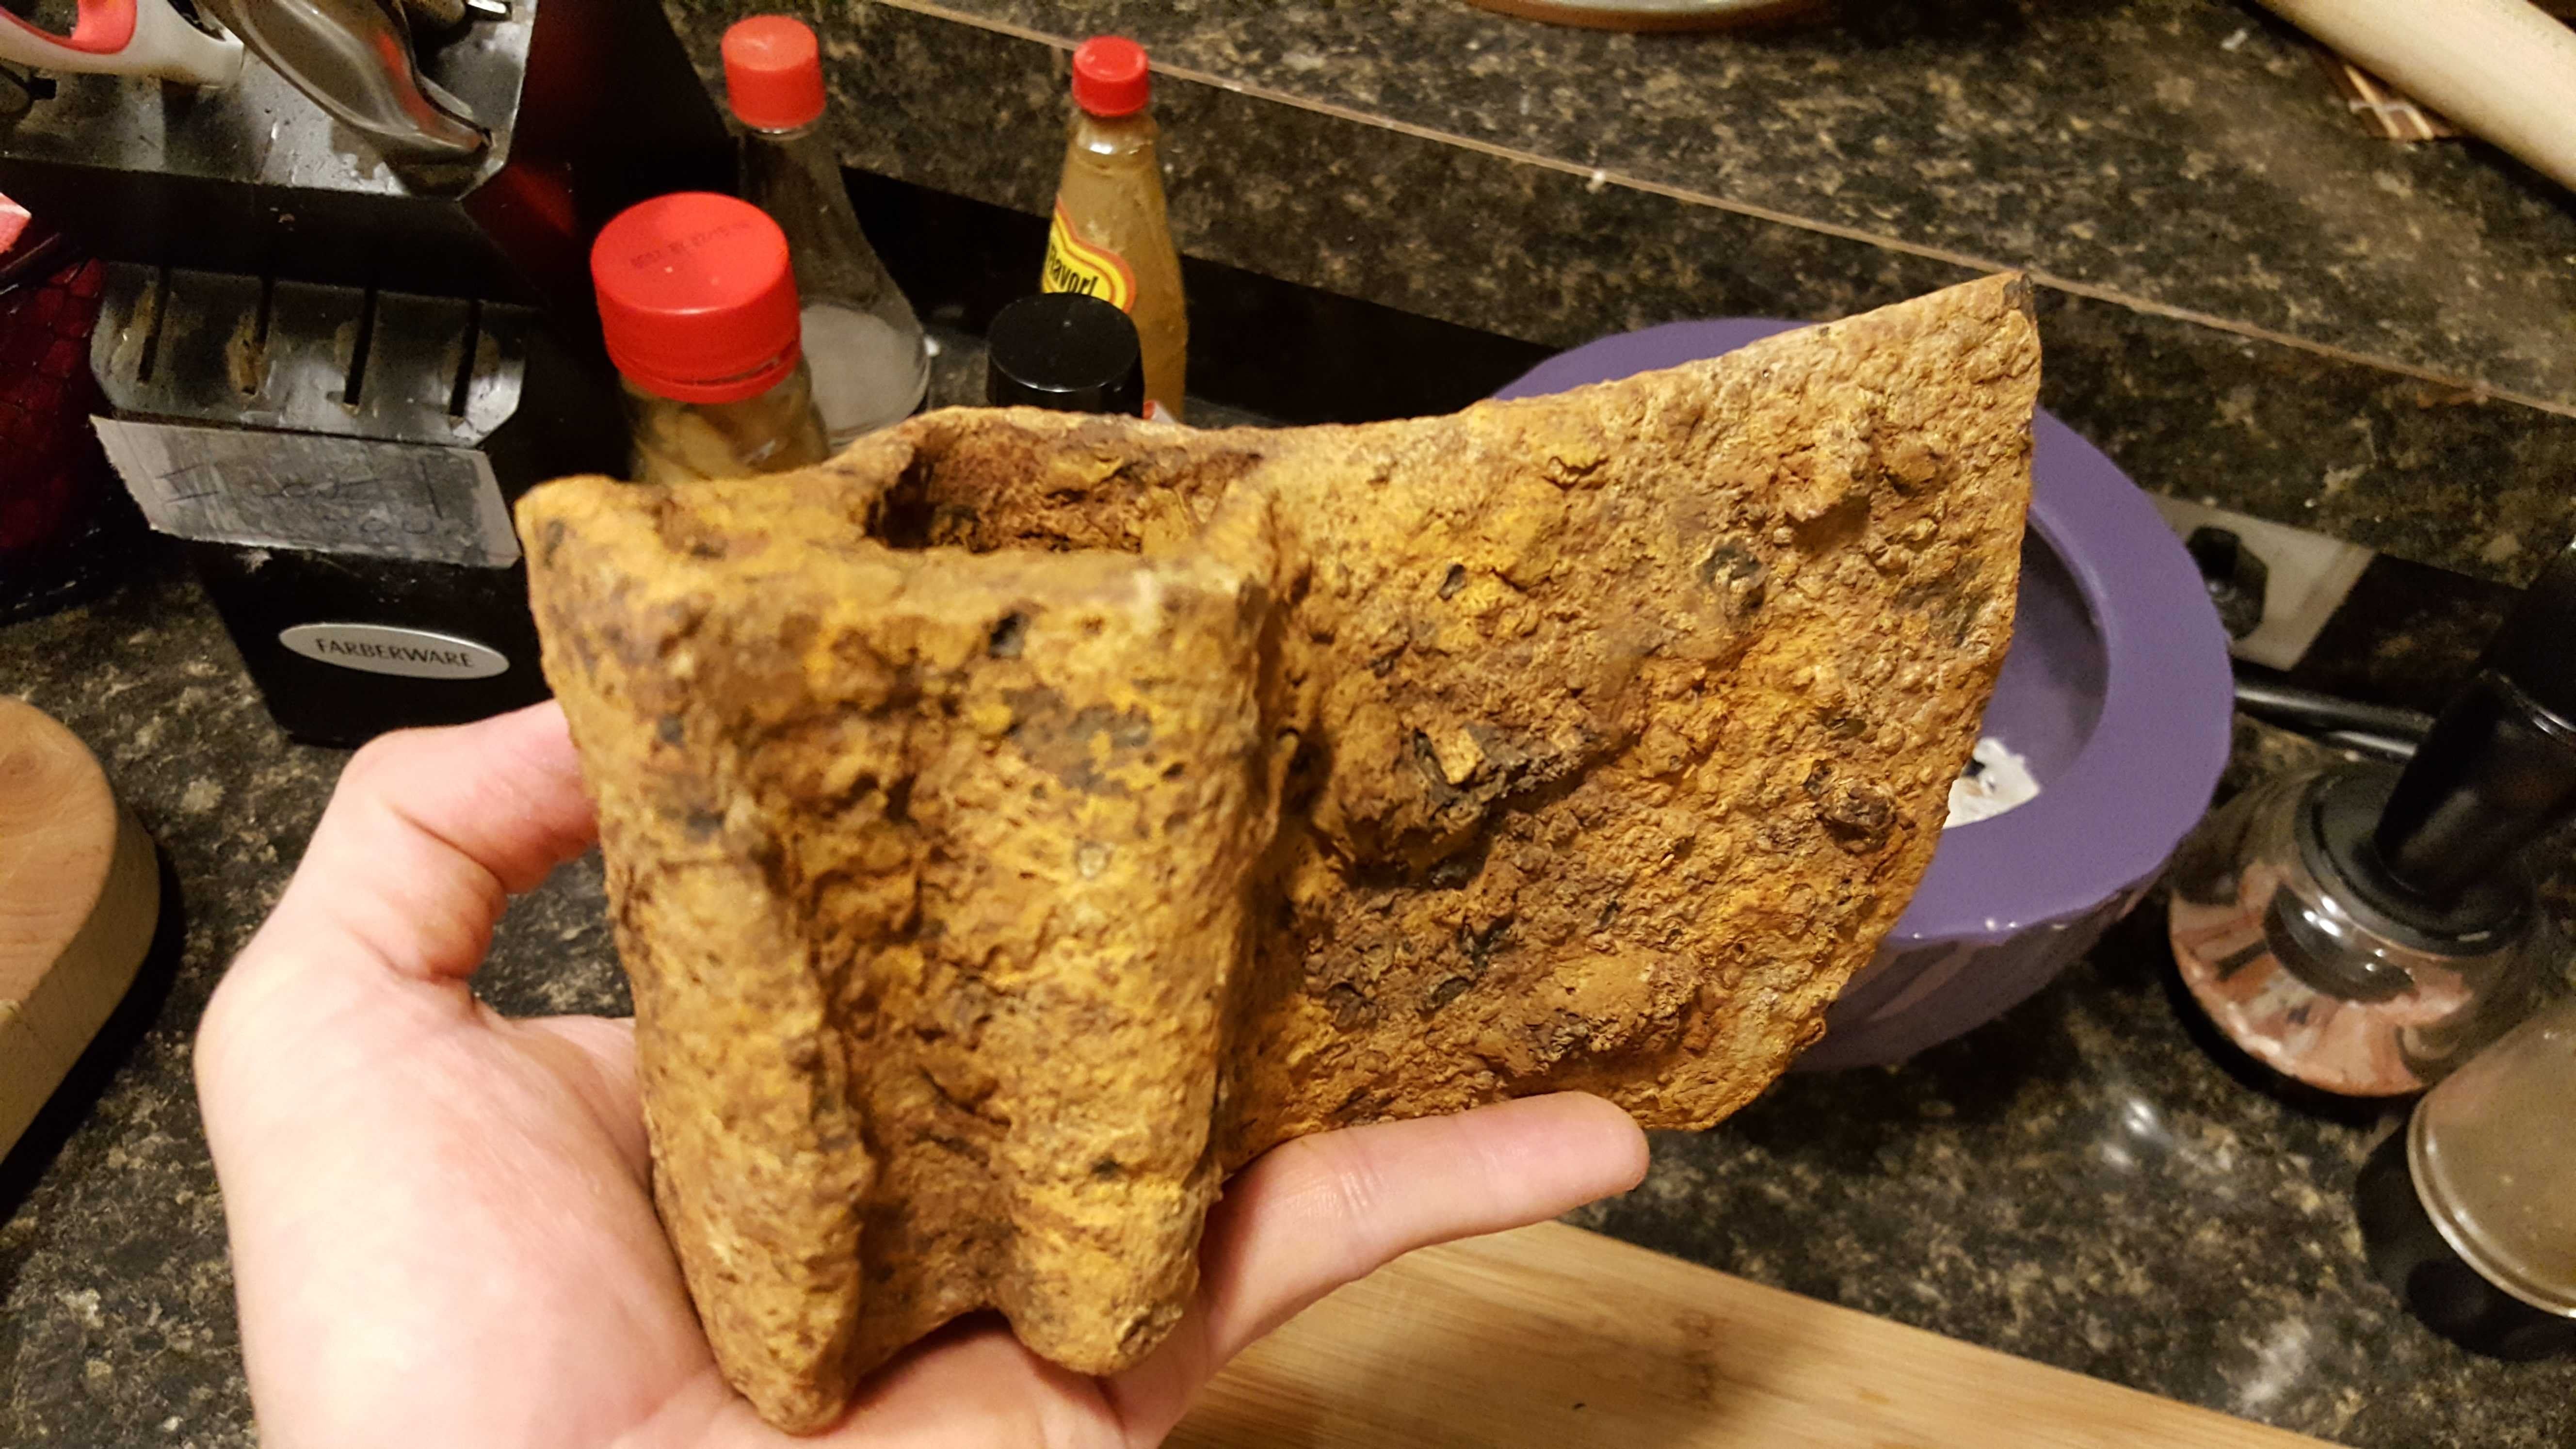 Axe head from Confederate camp.
Maybe an era piece?